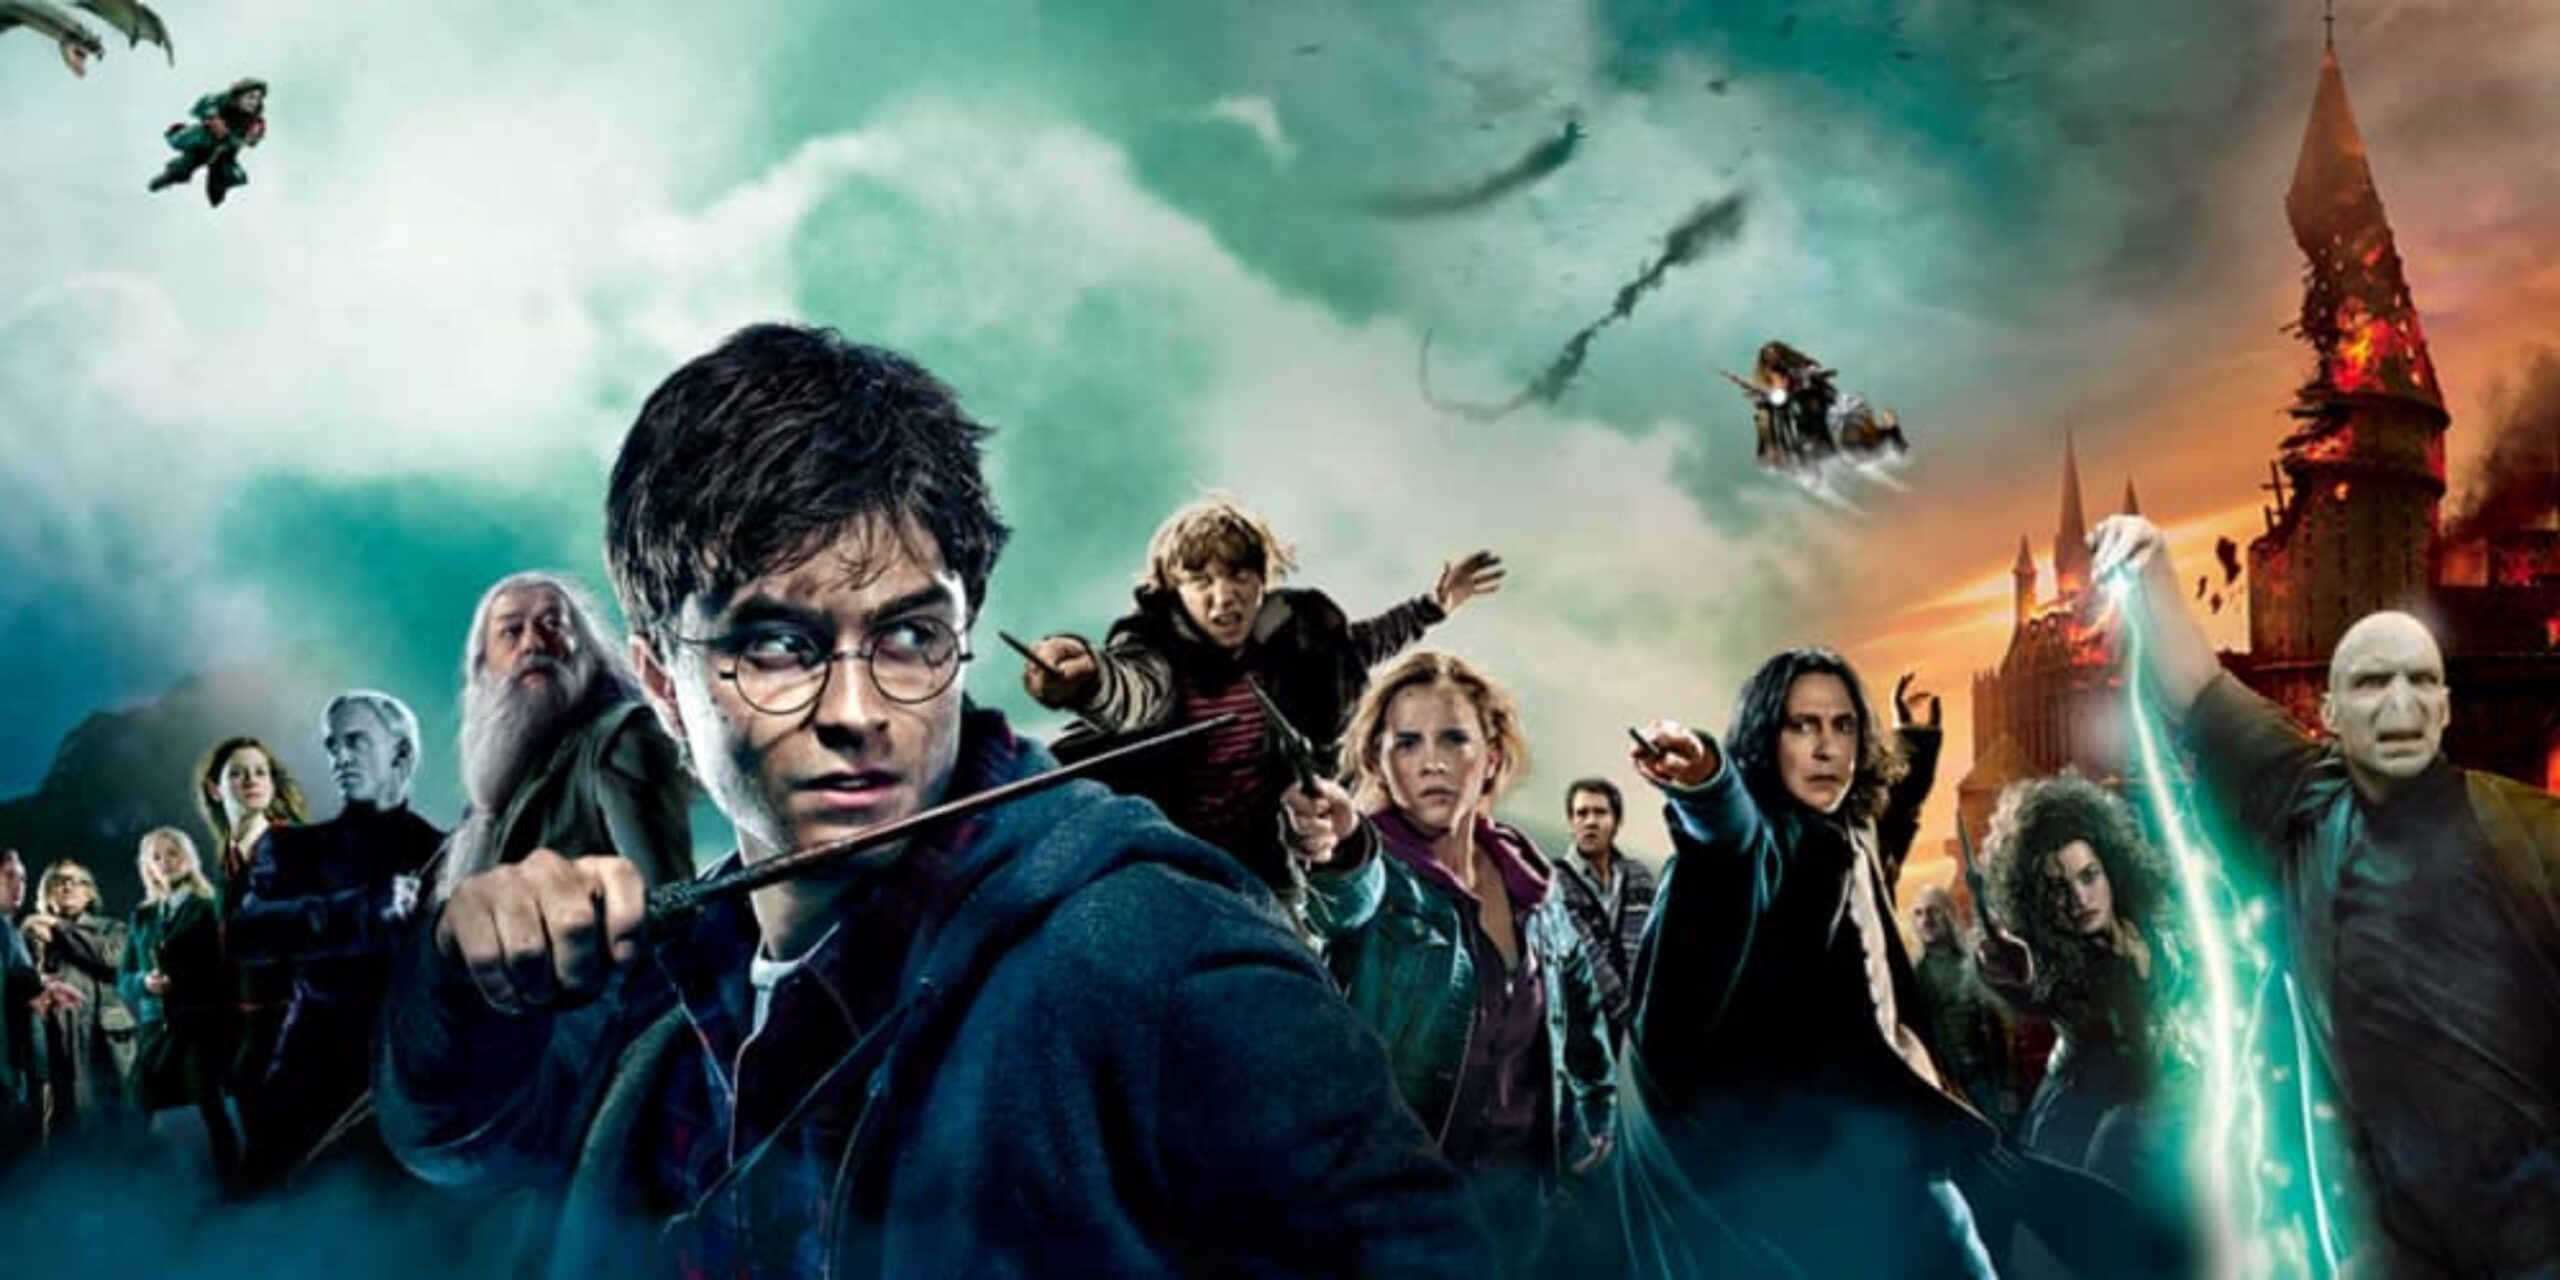 The 'Harry Potter' Films Are No Longer Available on Streaming Services